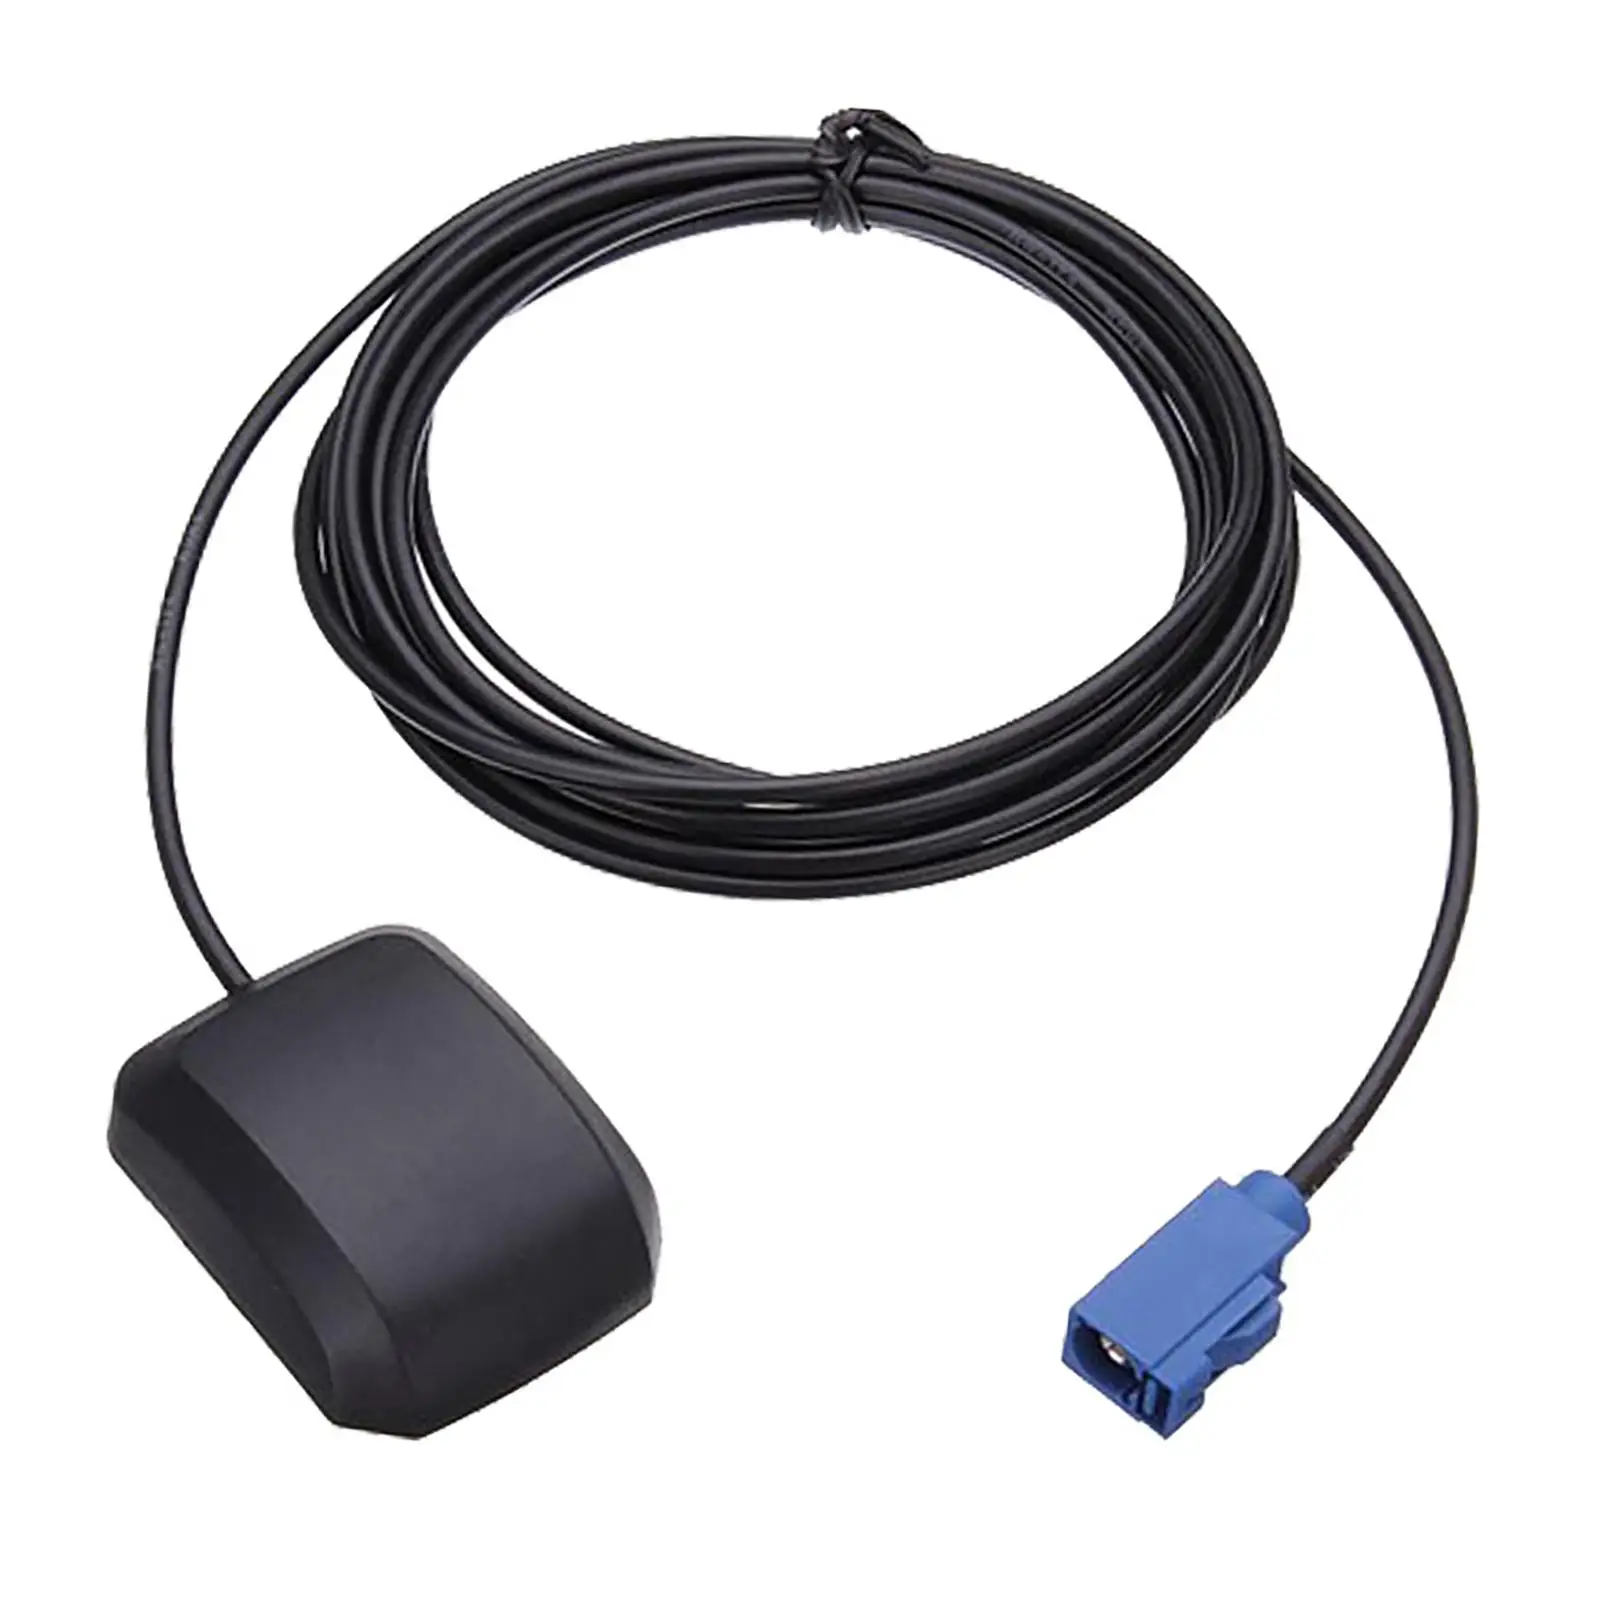 Vehicle Active Navigation with SMA Male Connector Real Time Tracking for Car Truck SUV Stereo Replacement